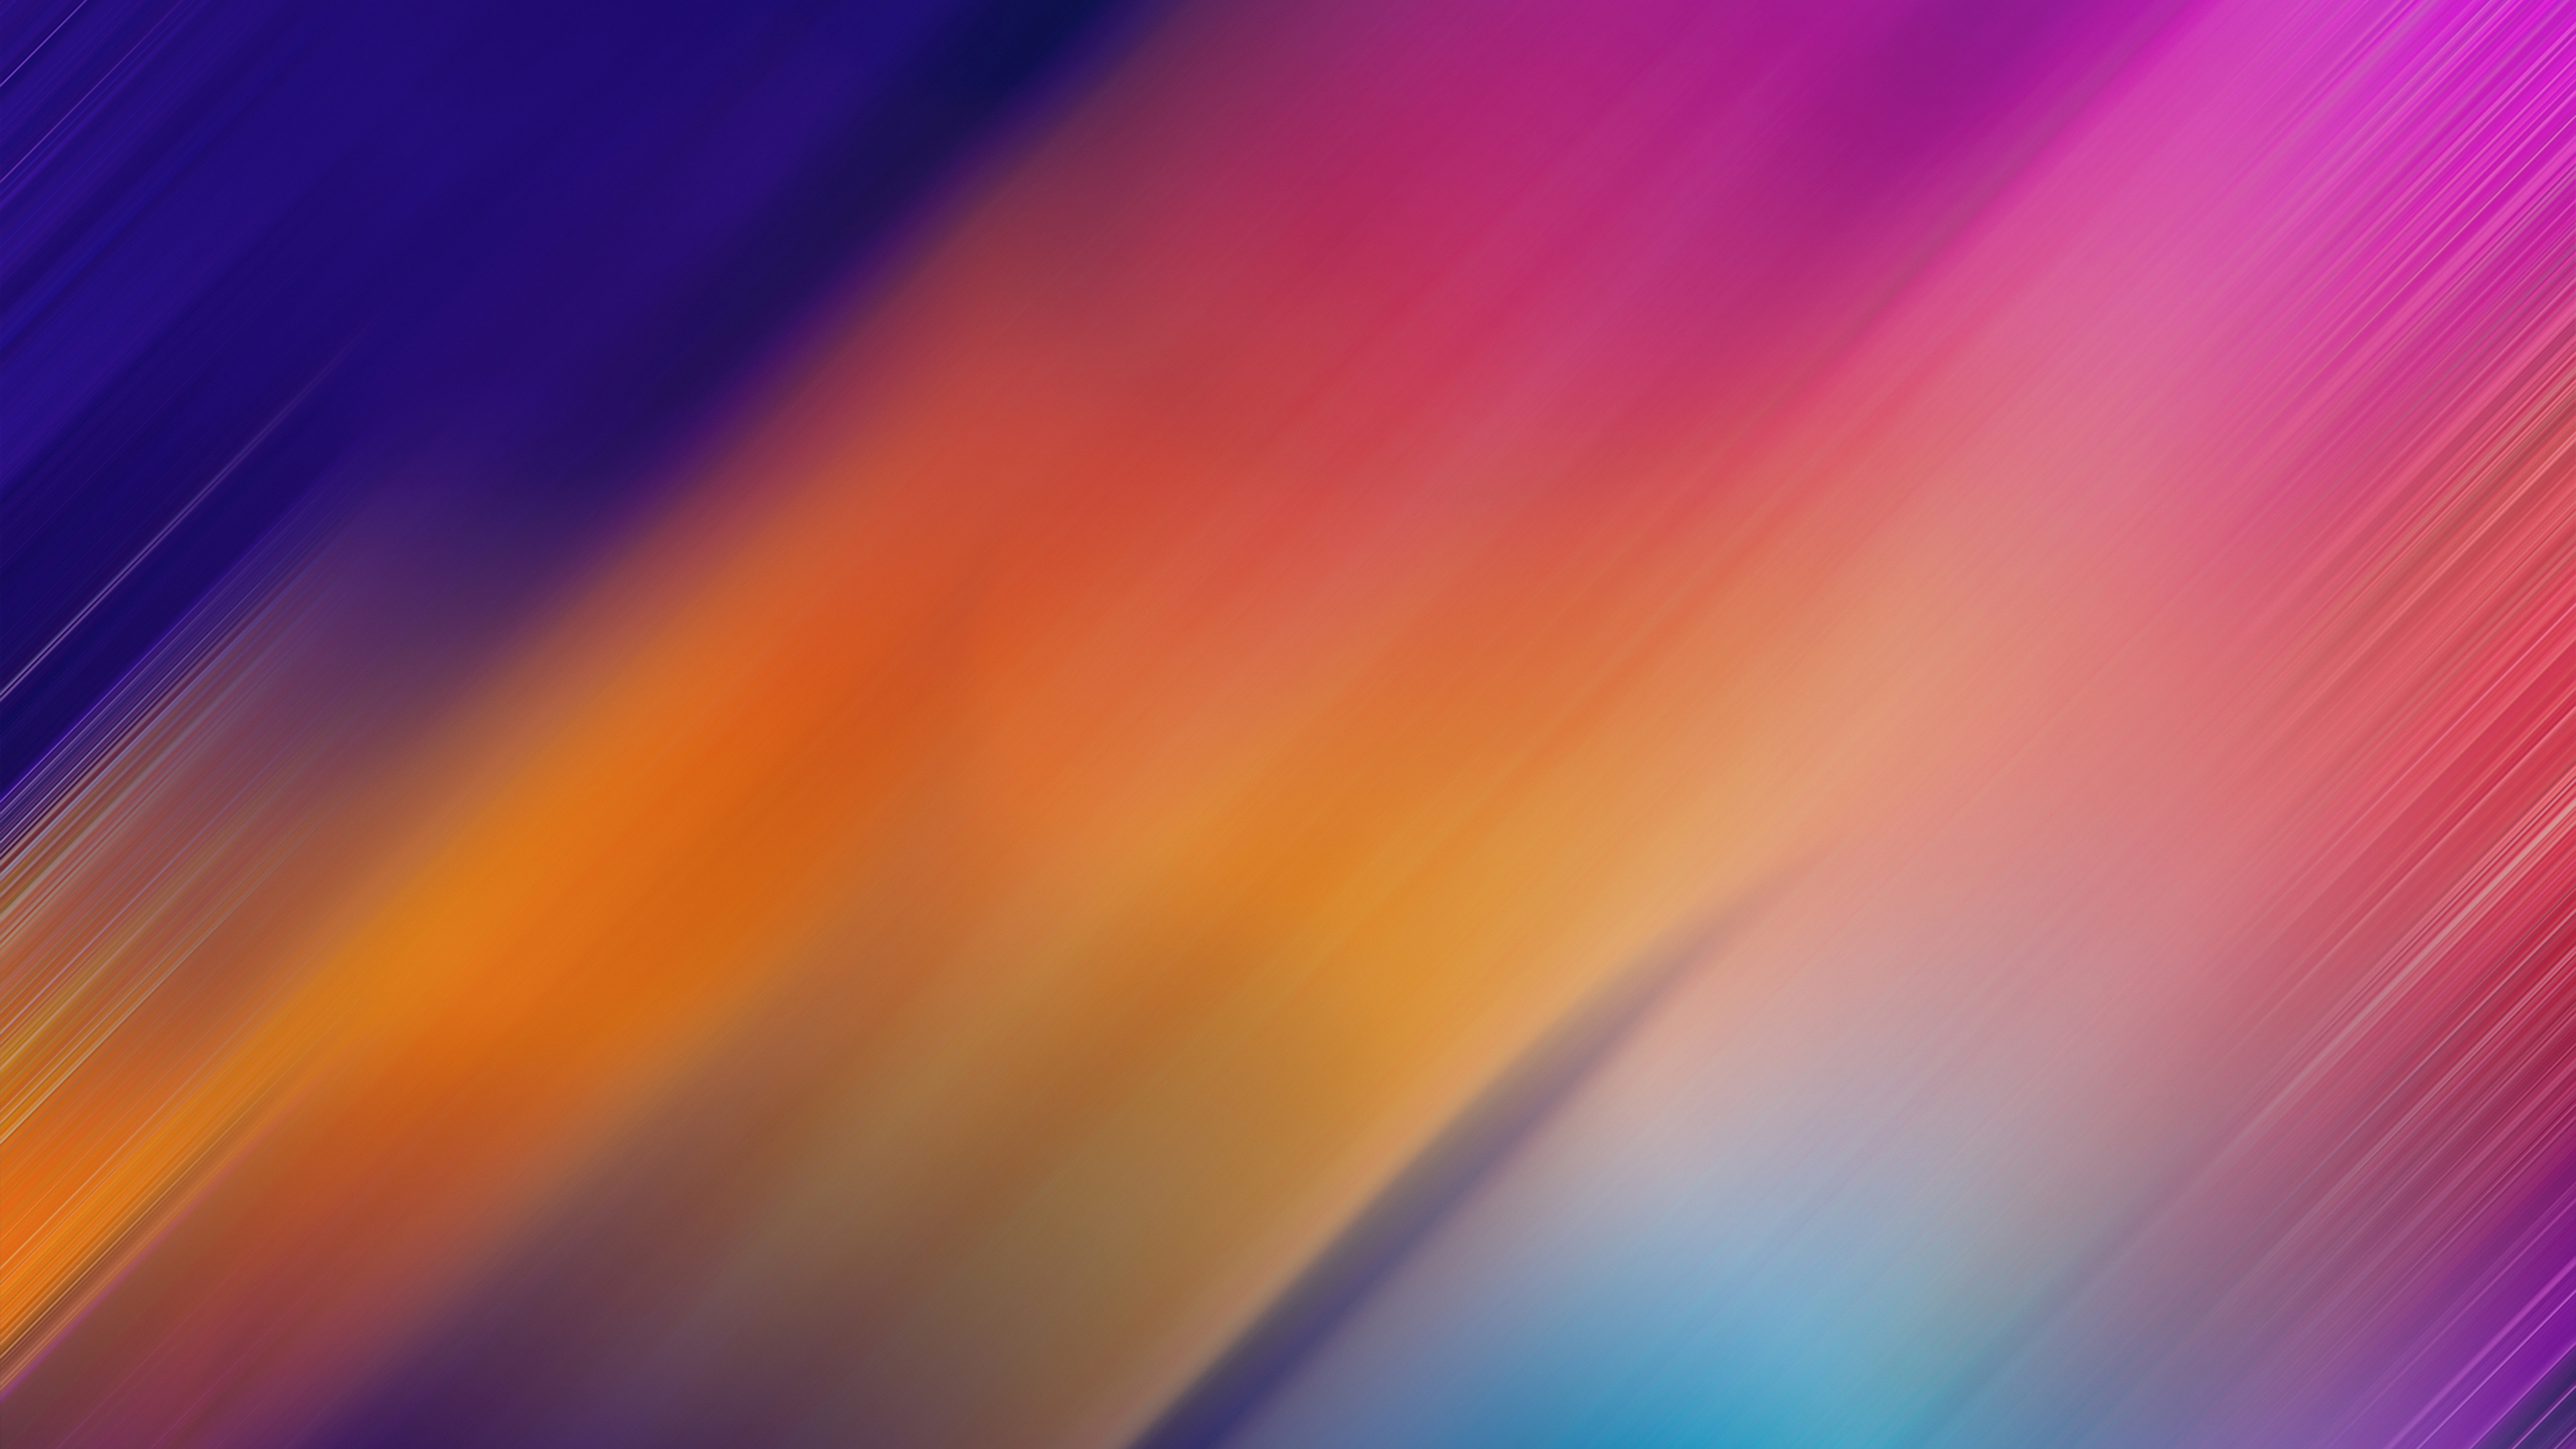 Abstract gradient wallpapers, Creative patterns, Artistic expression, Visual beauty, 3840x2160 4K Desktop